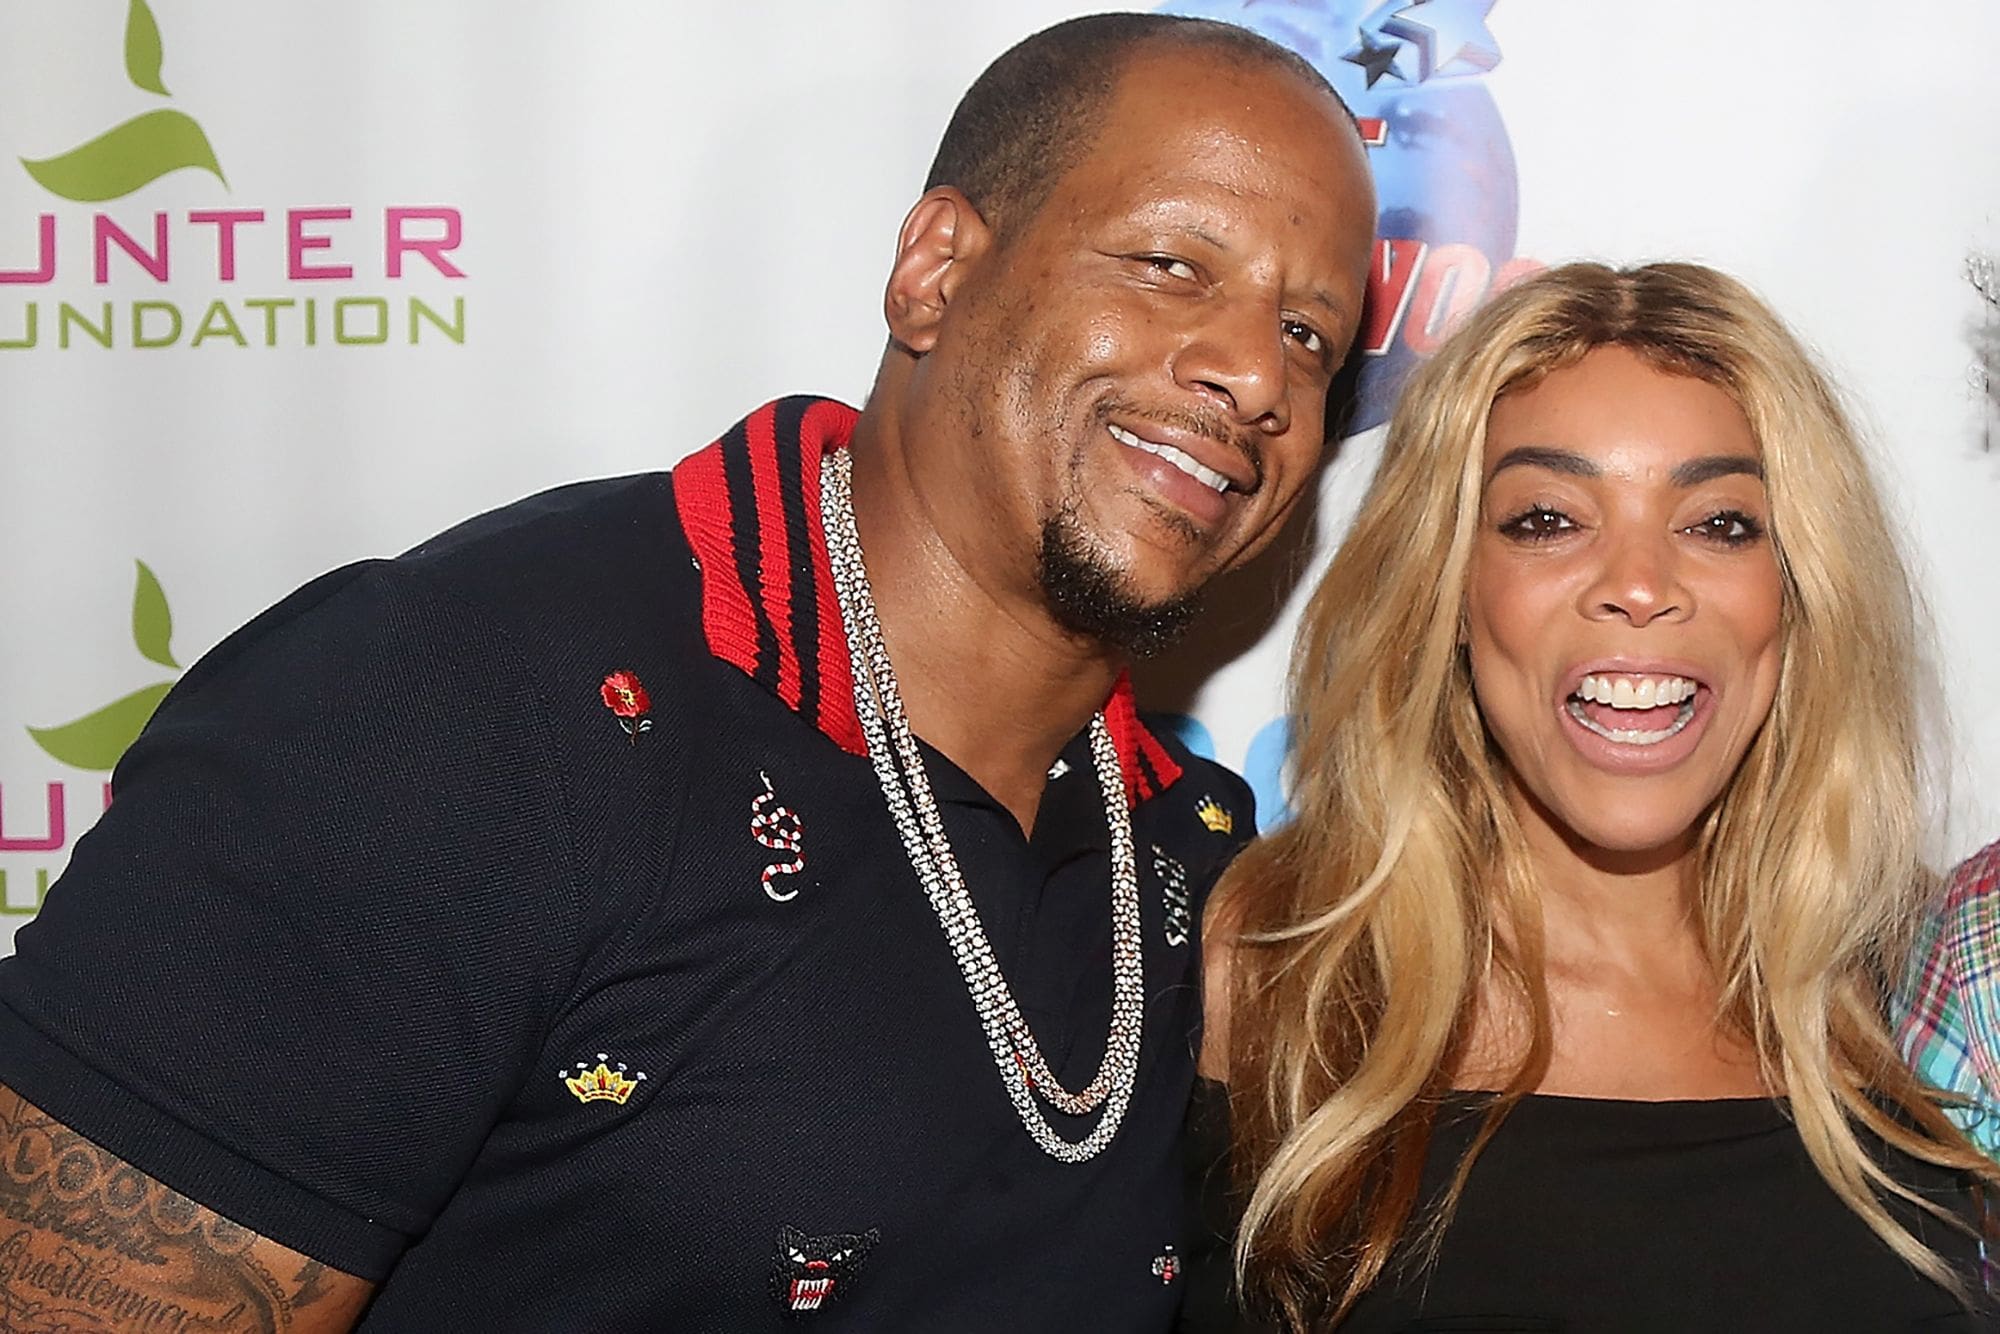 wendy-williams-ex-kevin-hunter-triggers-massive-criticism-following-his-birthday-posts